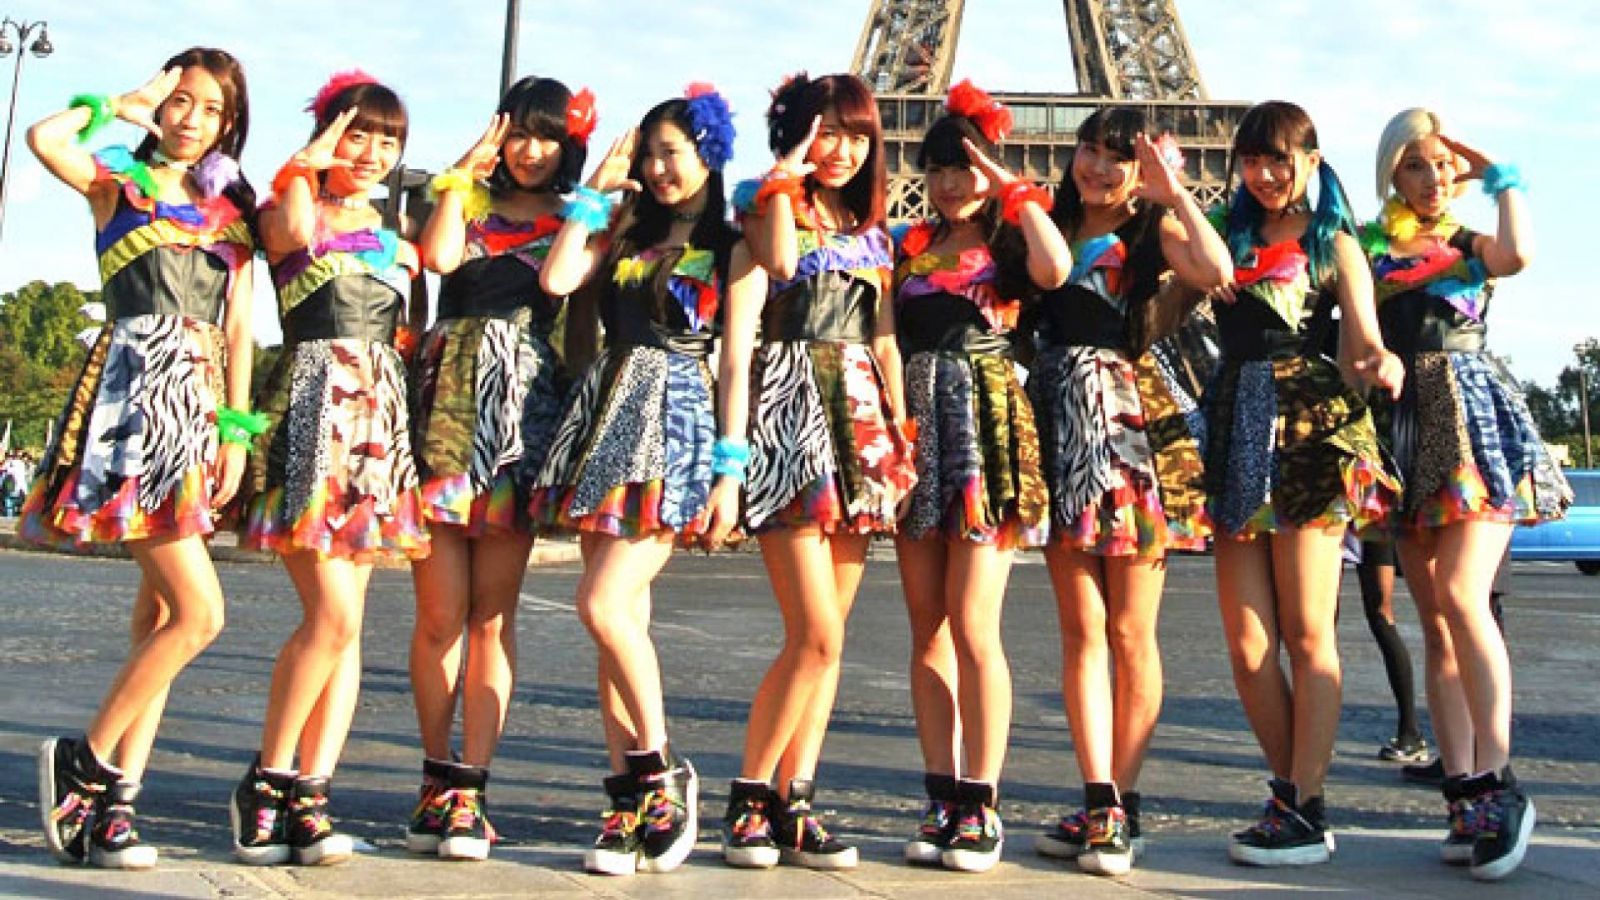 Interview with Cheeky Parade © Cheeky Parade. All rights reserved.